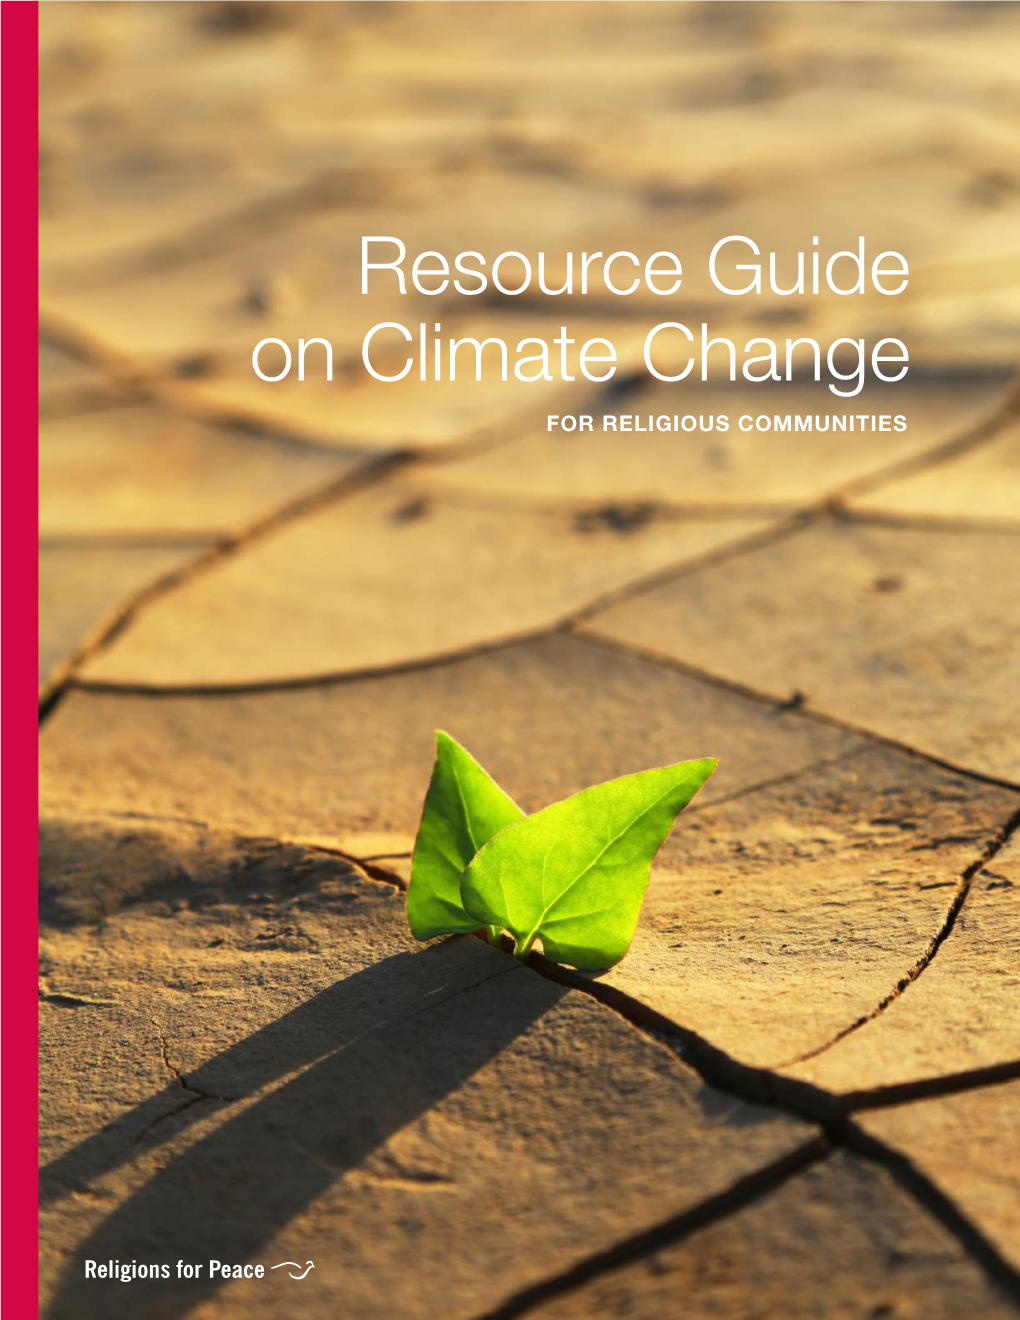 Resource Guide on Climate Change for RELIGIOUS COMMUNITIES © Religions for Peace December 2016